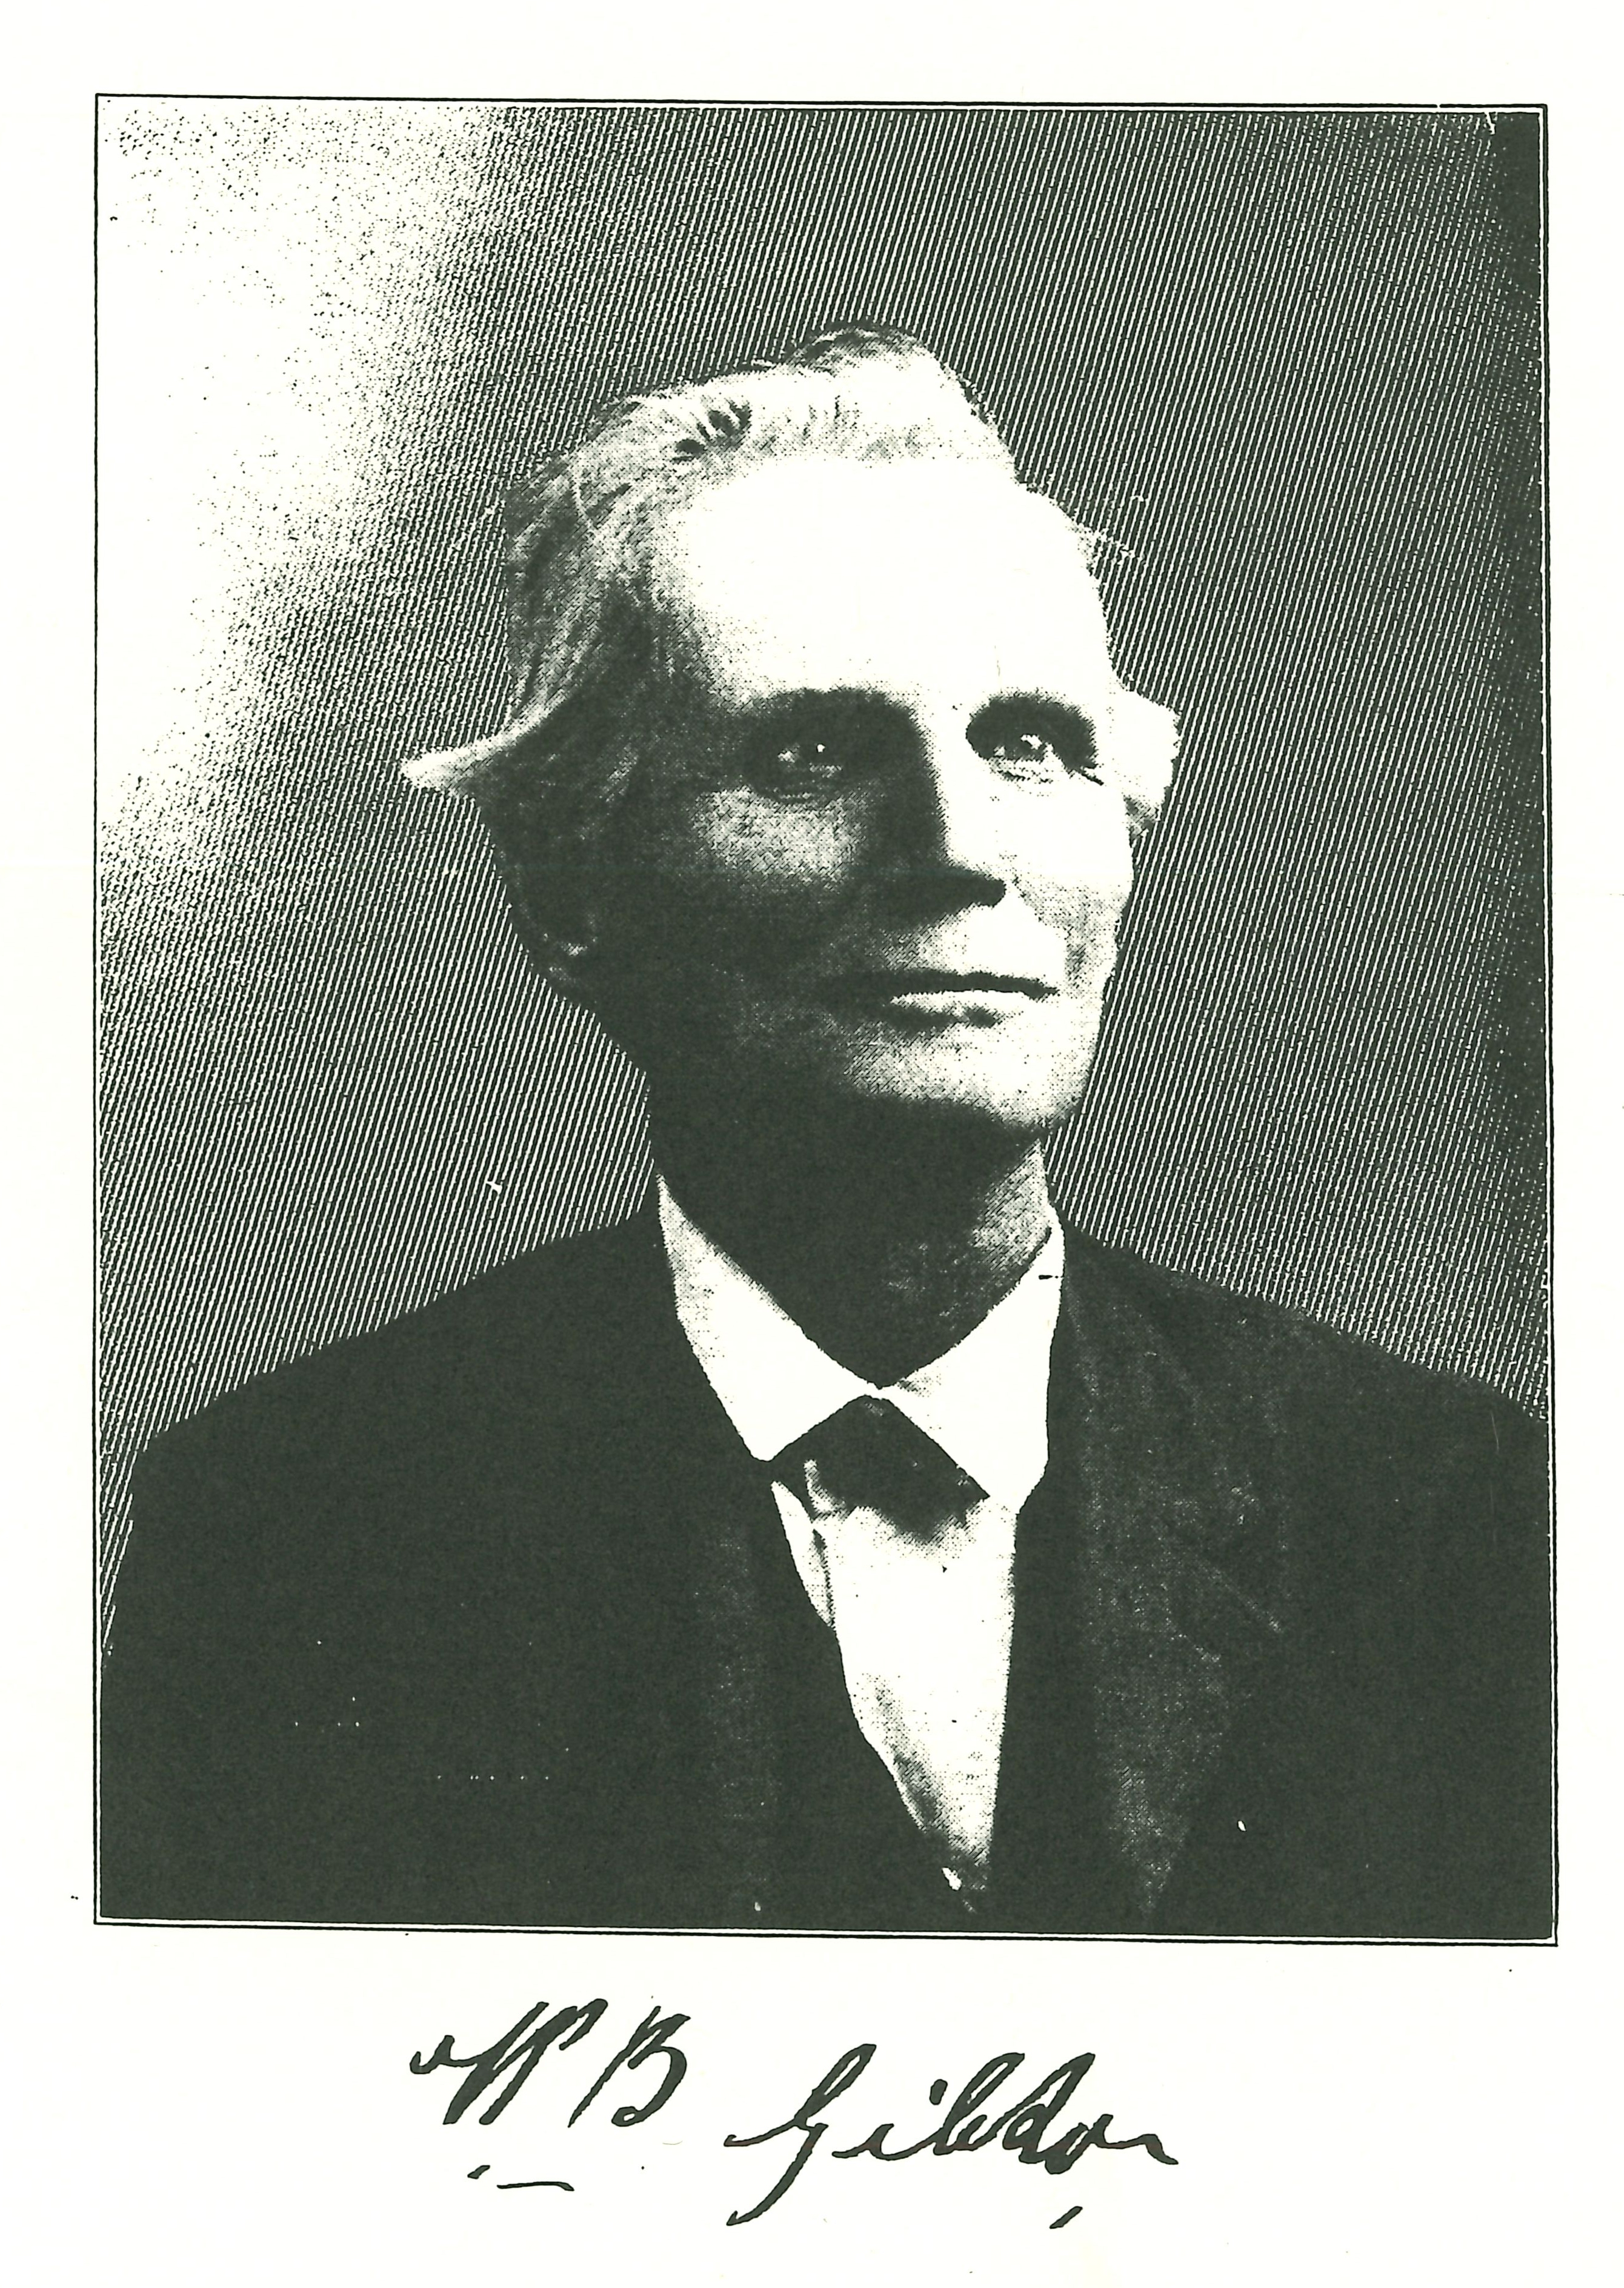 William B. Gibson, History of Yolo County, Gregory, 1913. pg. 280. Courtesy of Yolo County Archives